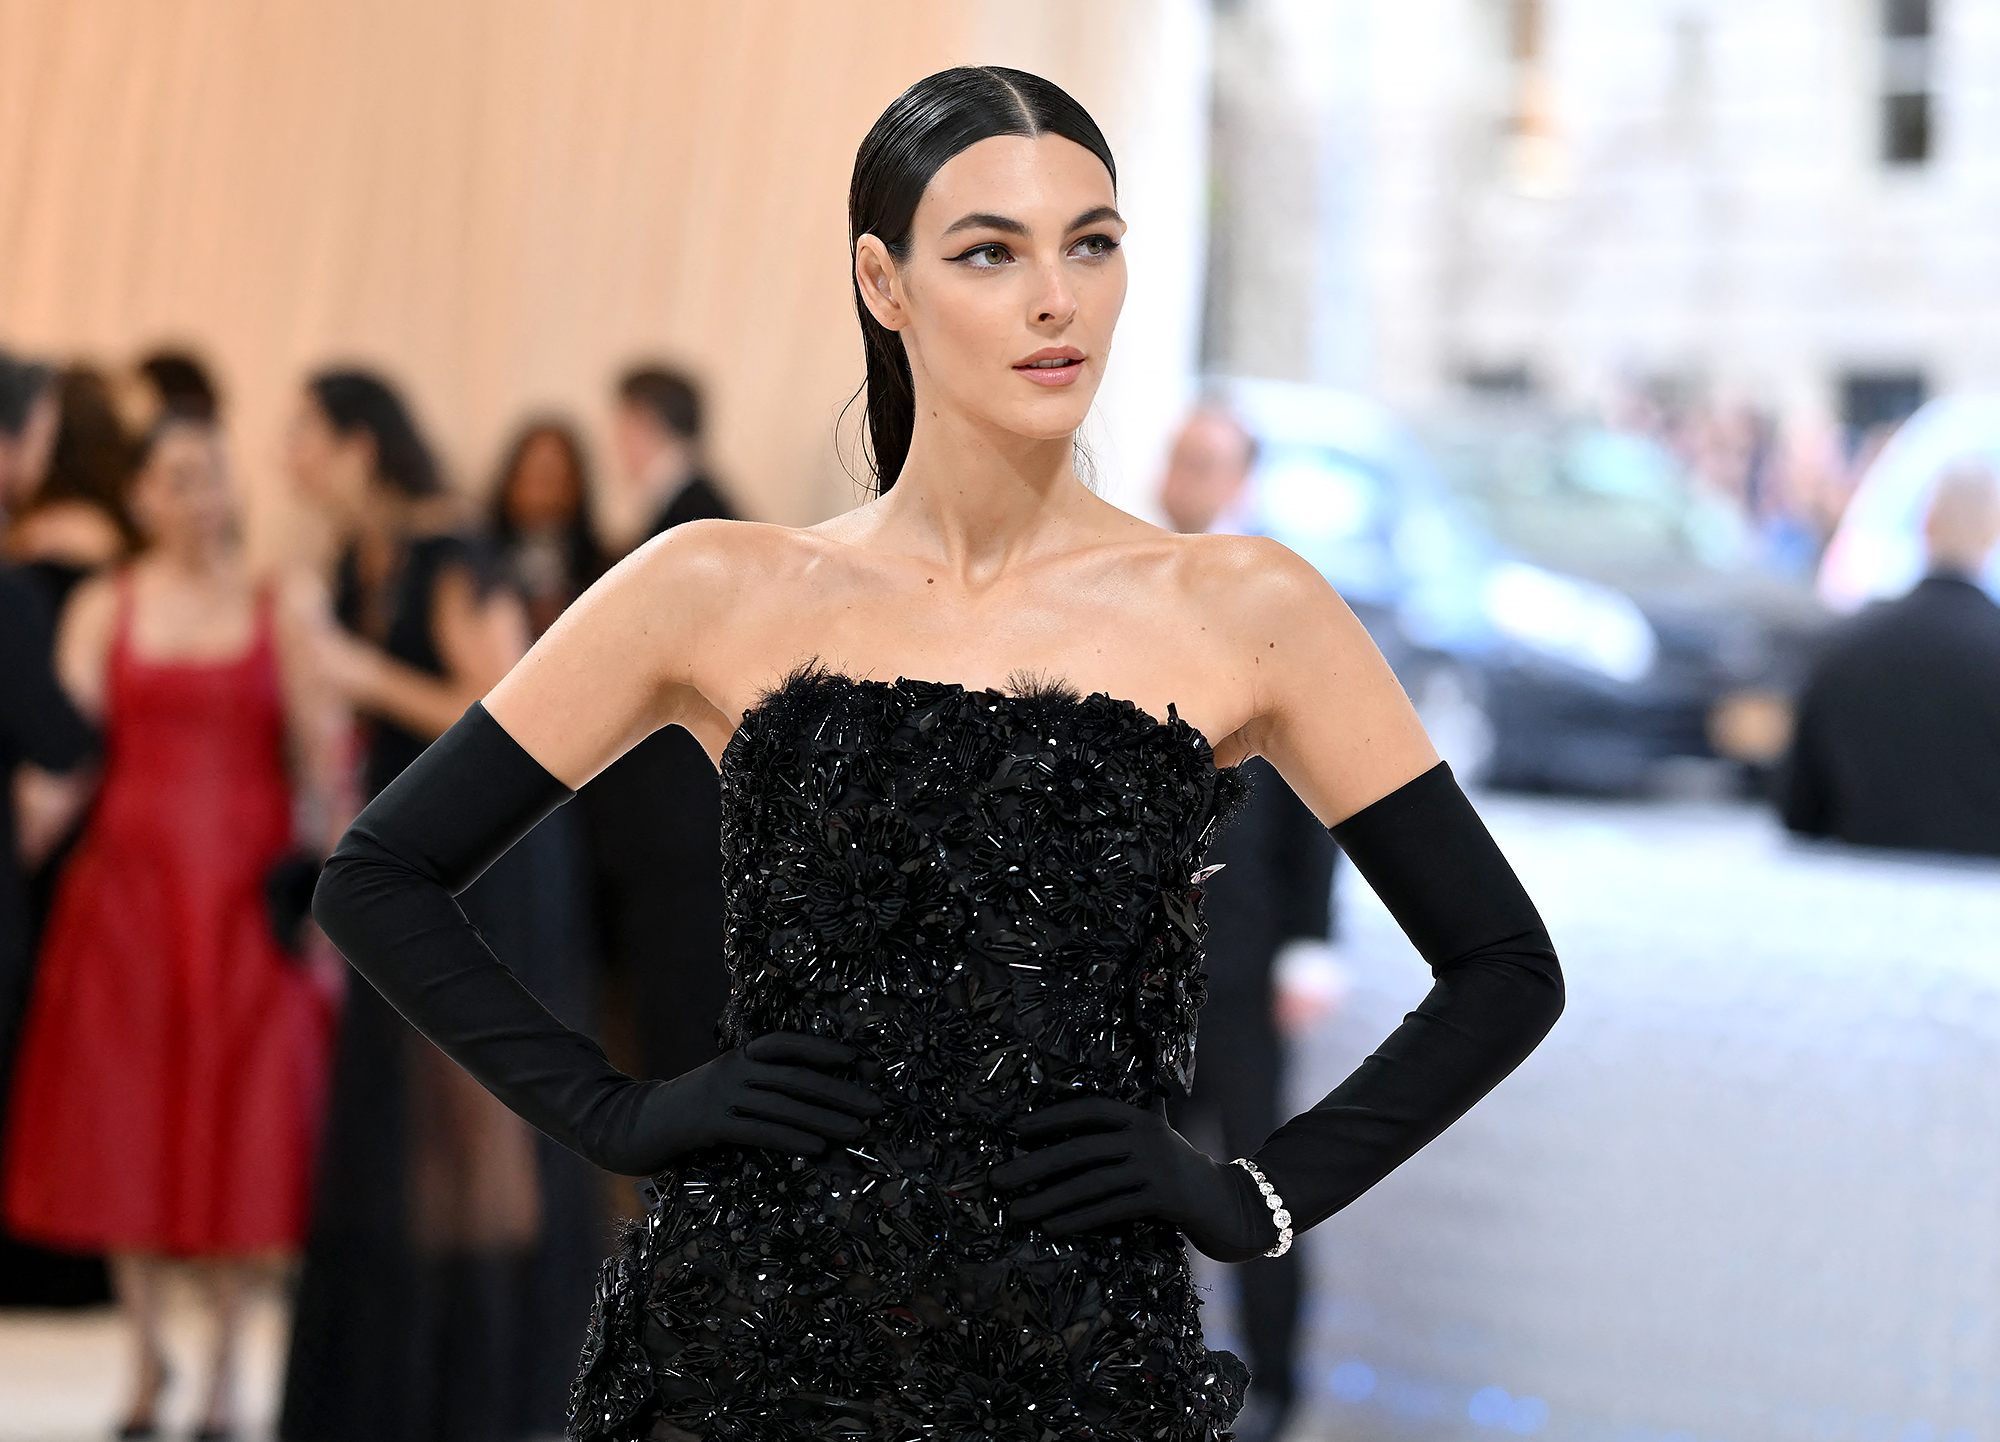 Who Is Vittoria Ceretti? 5 Things to Know About the Model Seen Cozying Up With Leonardo DiCaprio